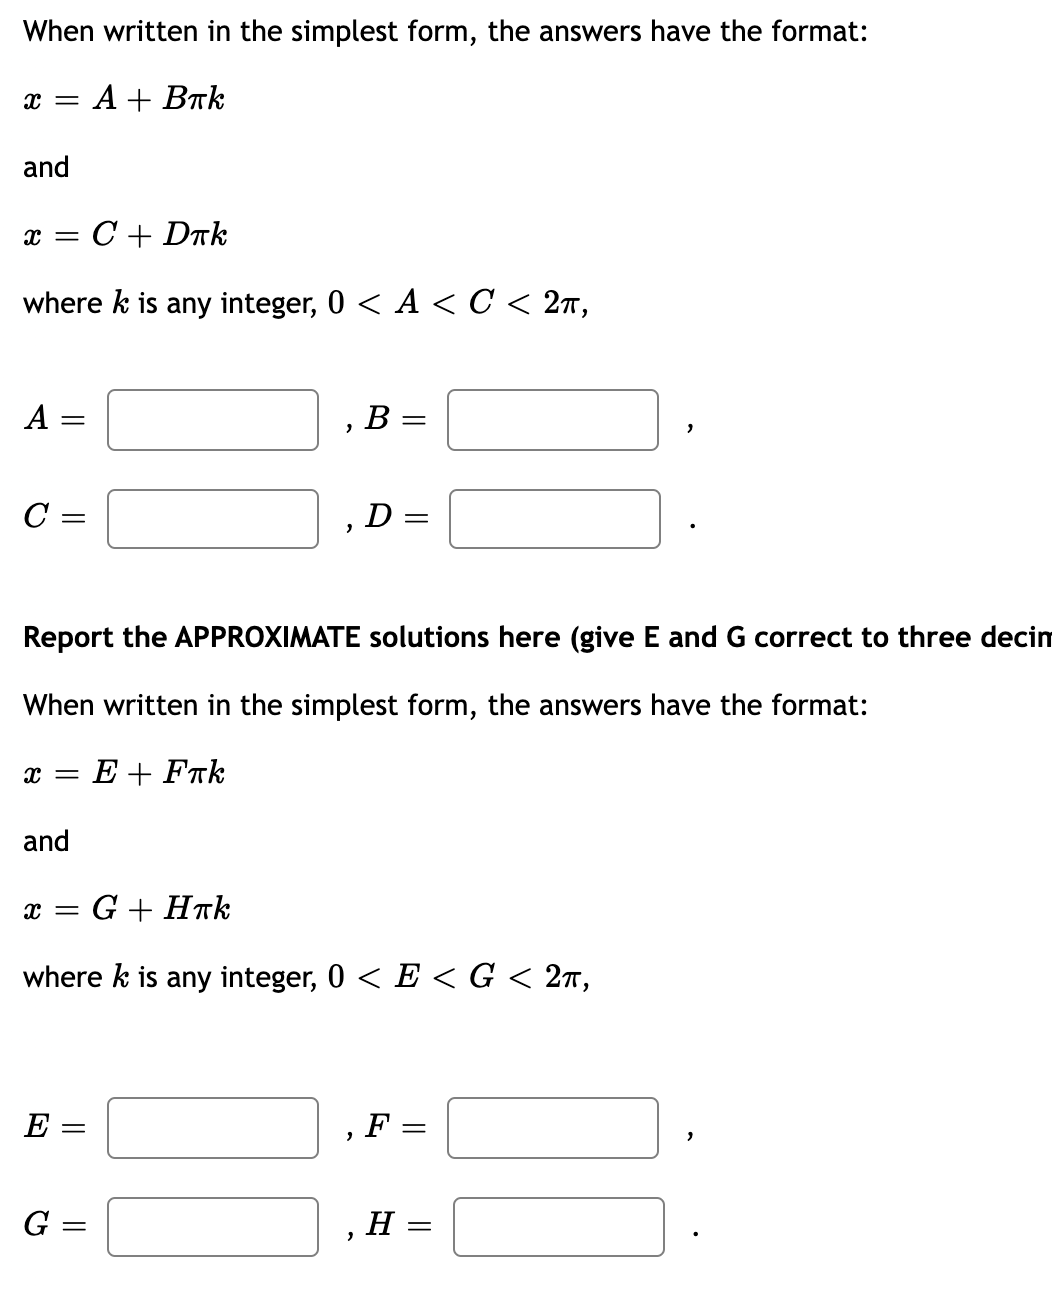 When written in the simplest form, the answers have the format:
Аl Втk
and
C + Drk
where k is any integer, 0 < A < C < 2ñ,
А
В -
C =
D =
Report the APPROXIMATE solutions here (give
and G correct to three decim
When written in the simplest form, the answers have the format:
x = E + Fak
and
x = G + HTk
where k is any integer, 0 < E < G < 2n,
E:
F =
G:
H
||
